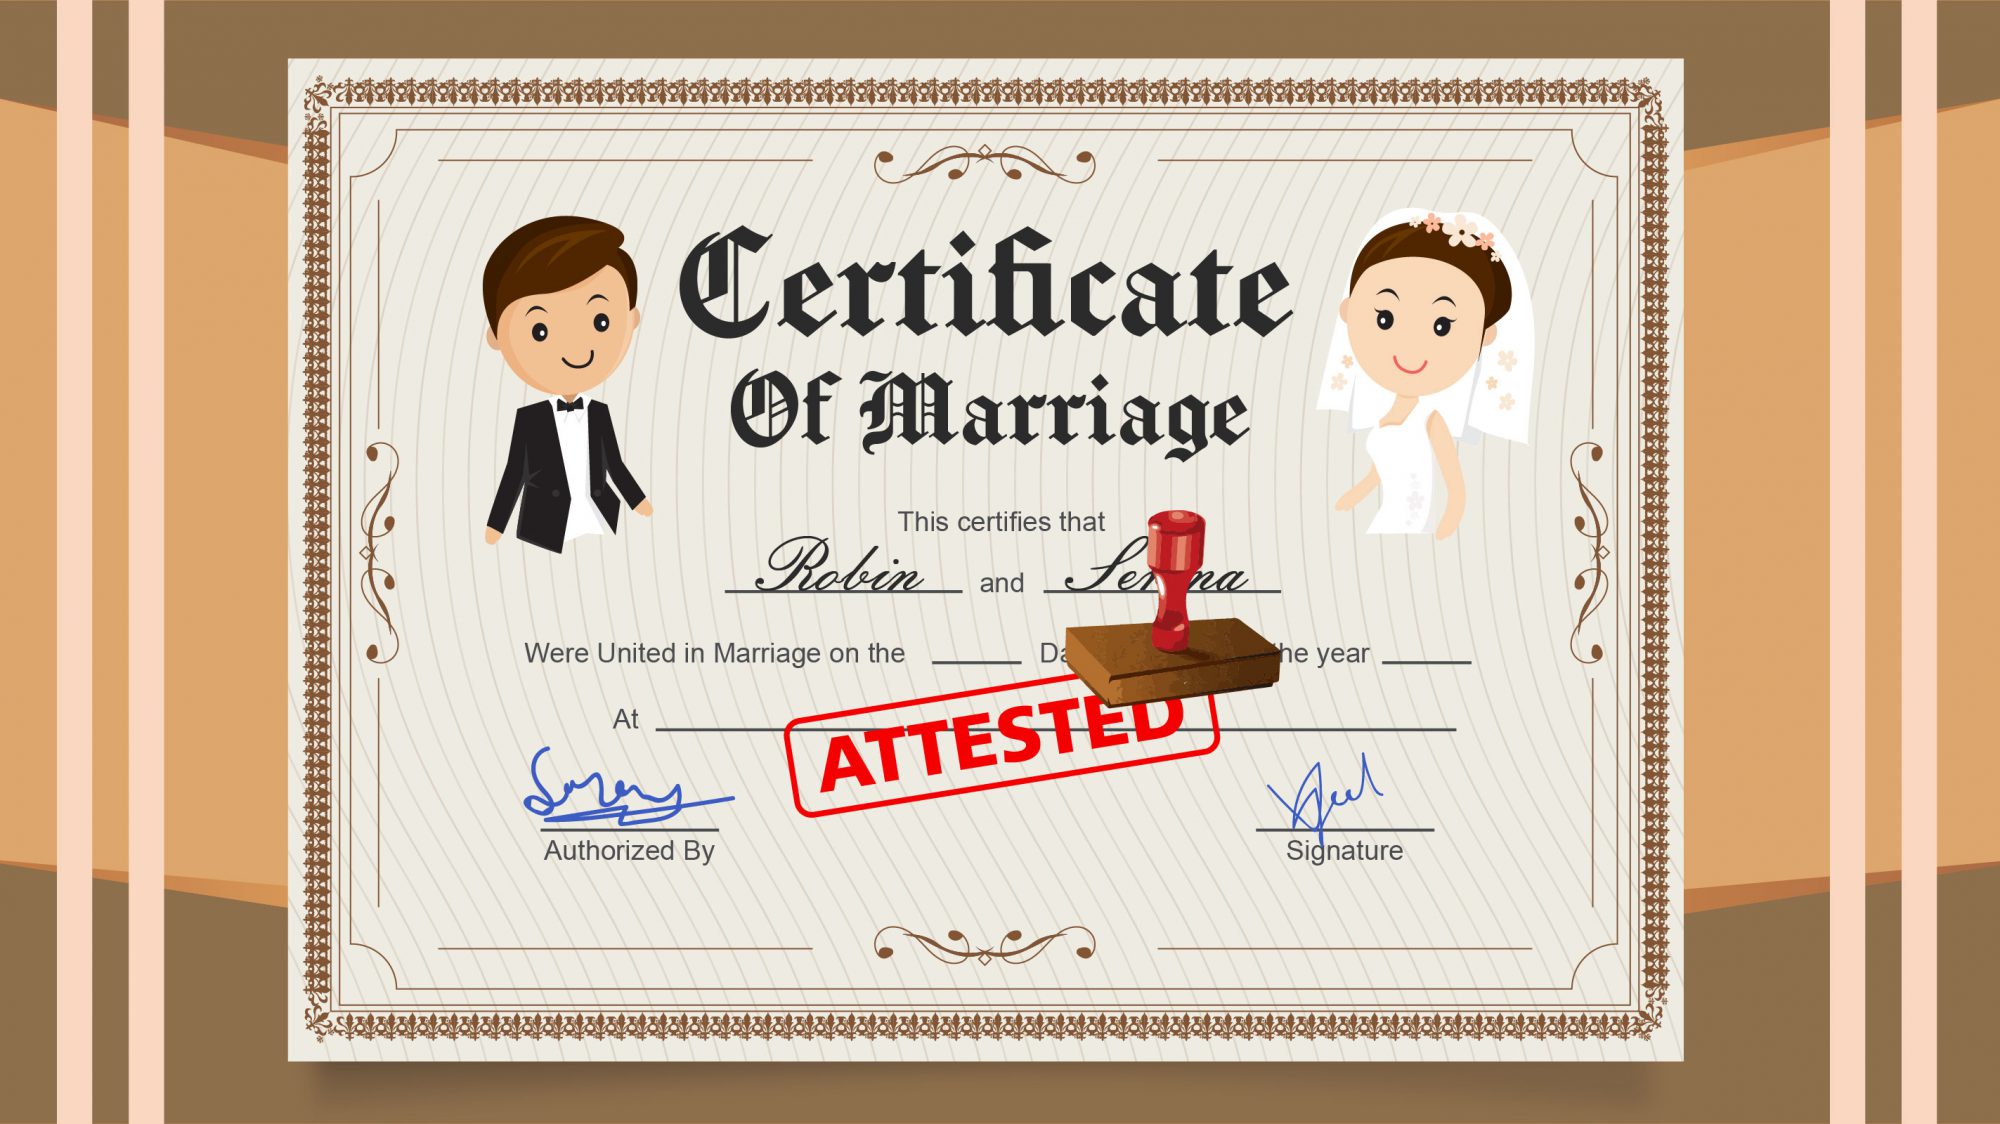 How To Do A Marriage Certificate Attestation For Dubai Attestation